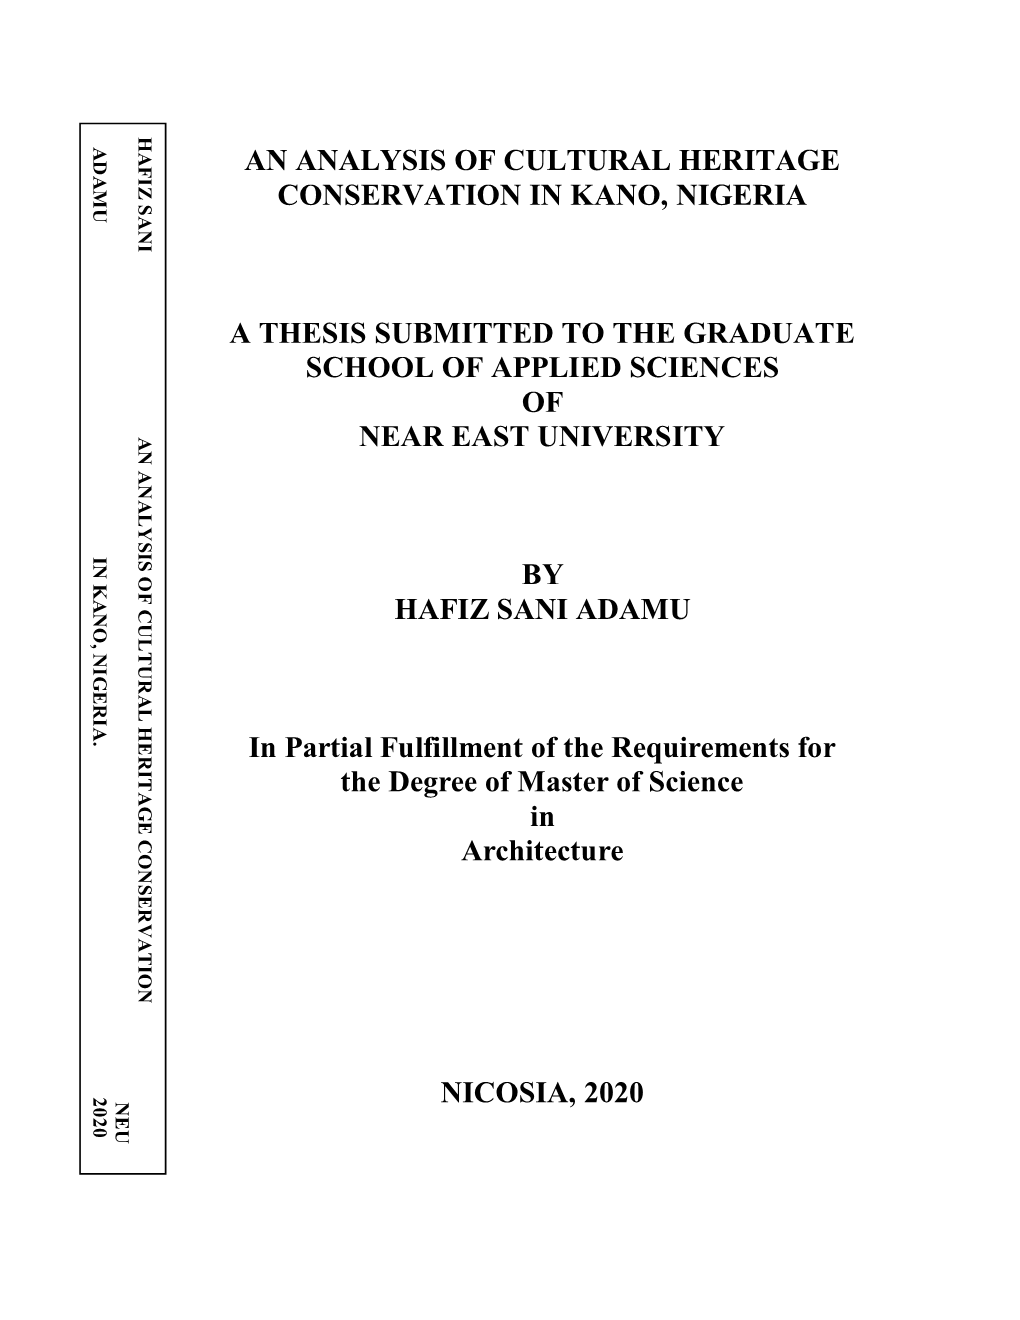 An Analysis of Cultural Heritage Conservation in Kano, Nigeria